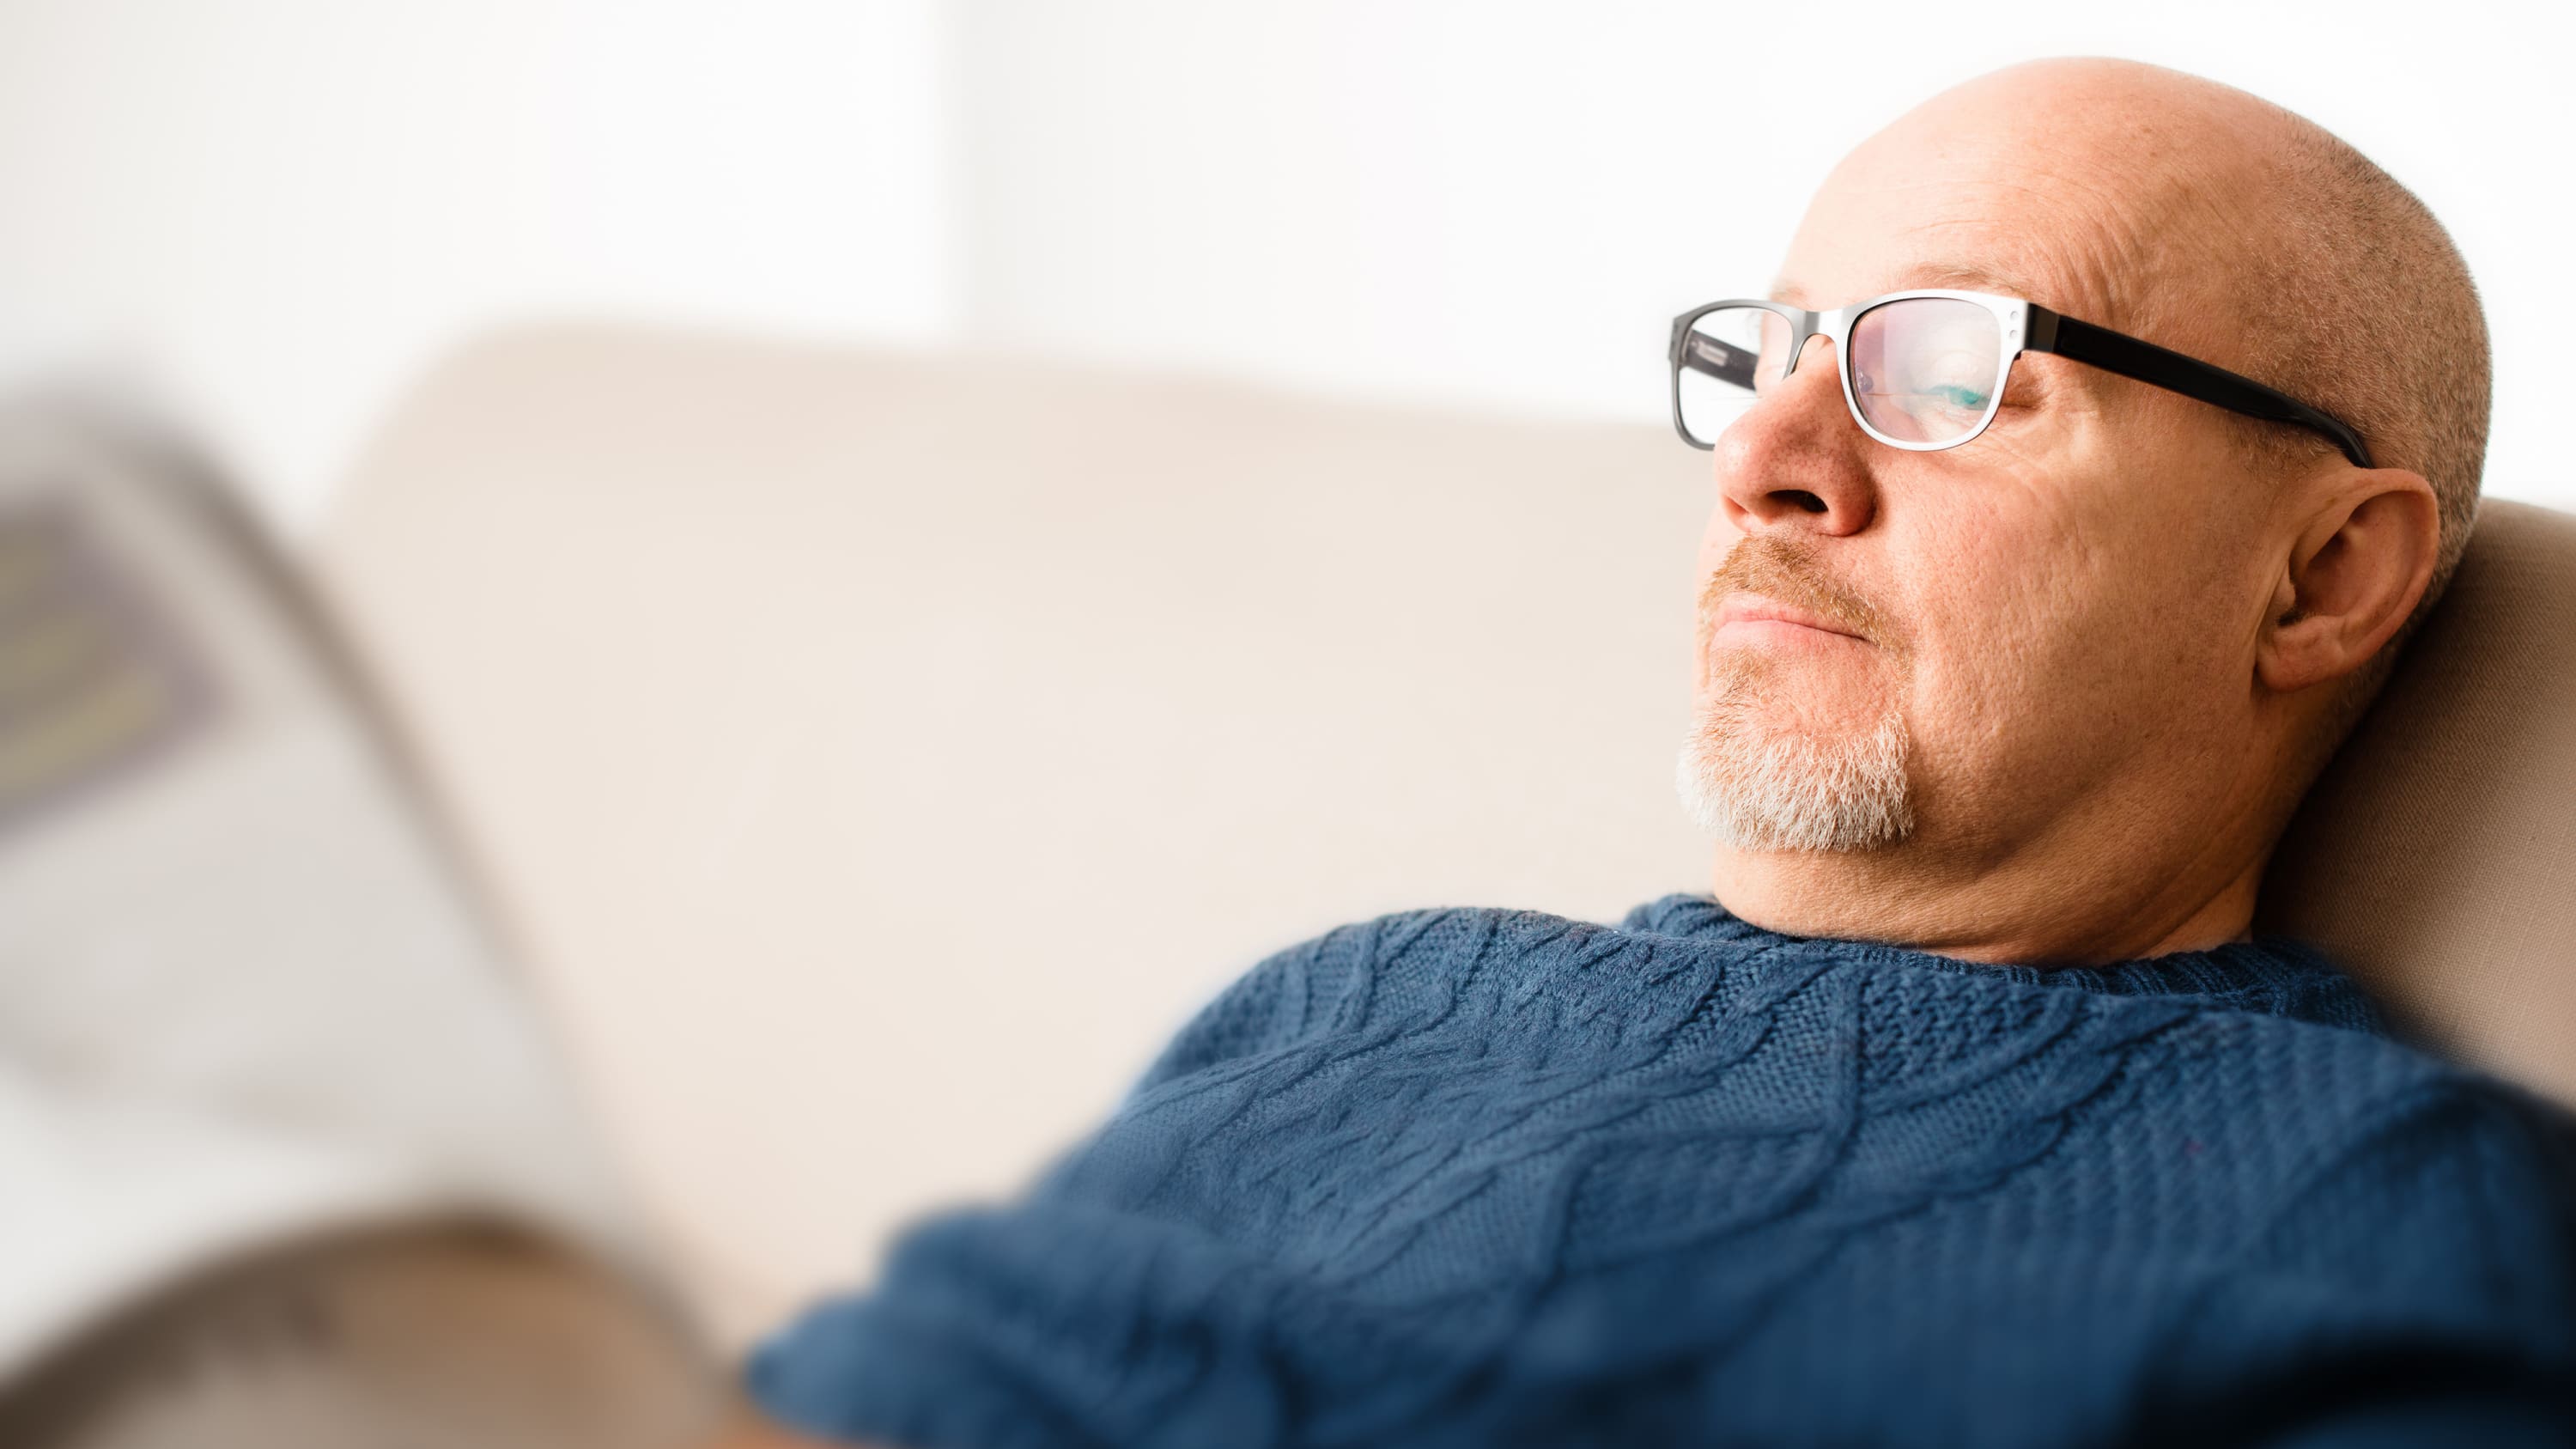 Middle-aged man who could be a candidate for peripheral vascular disease sits on the couch reading a newspaper.